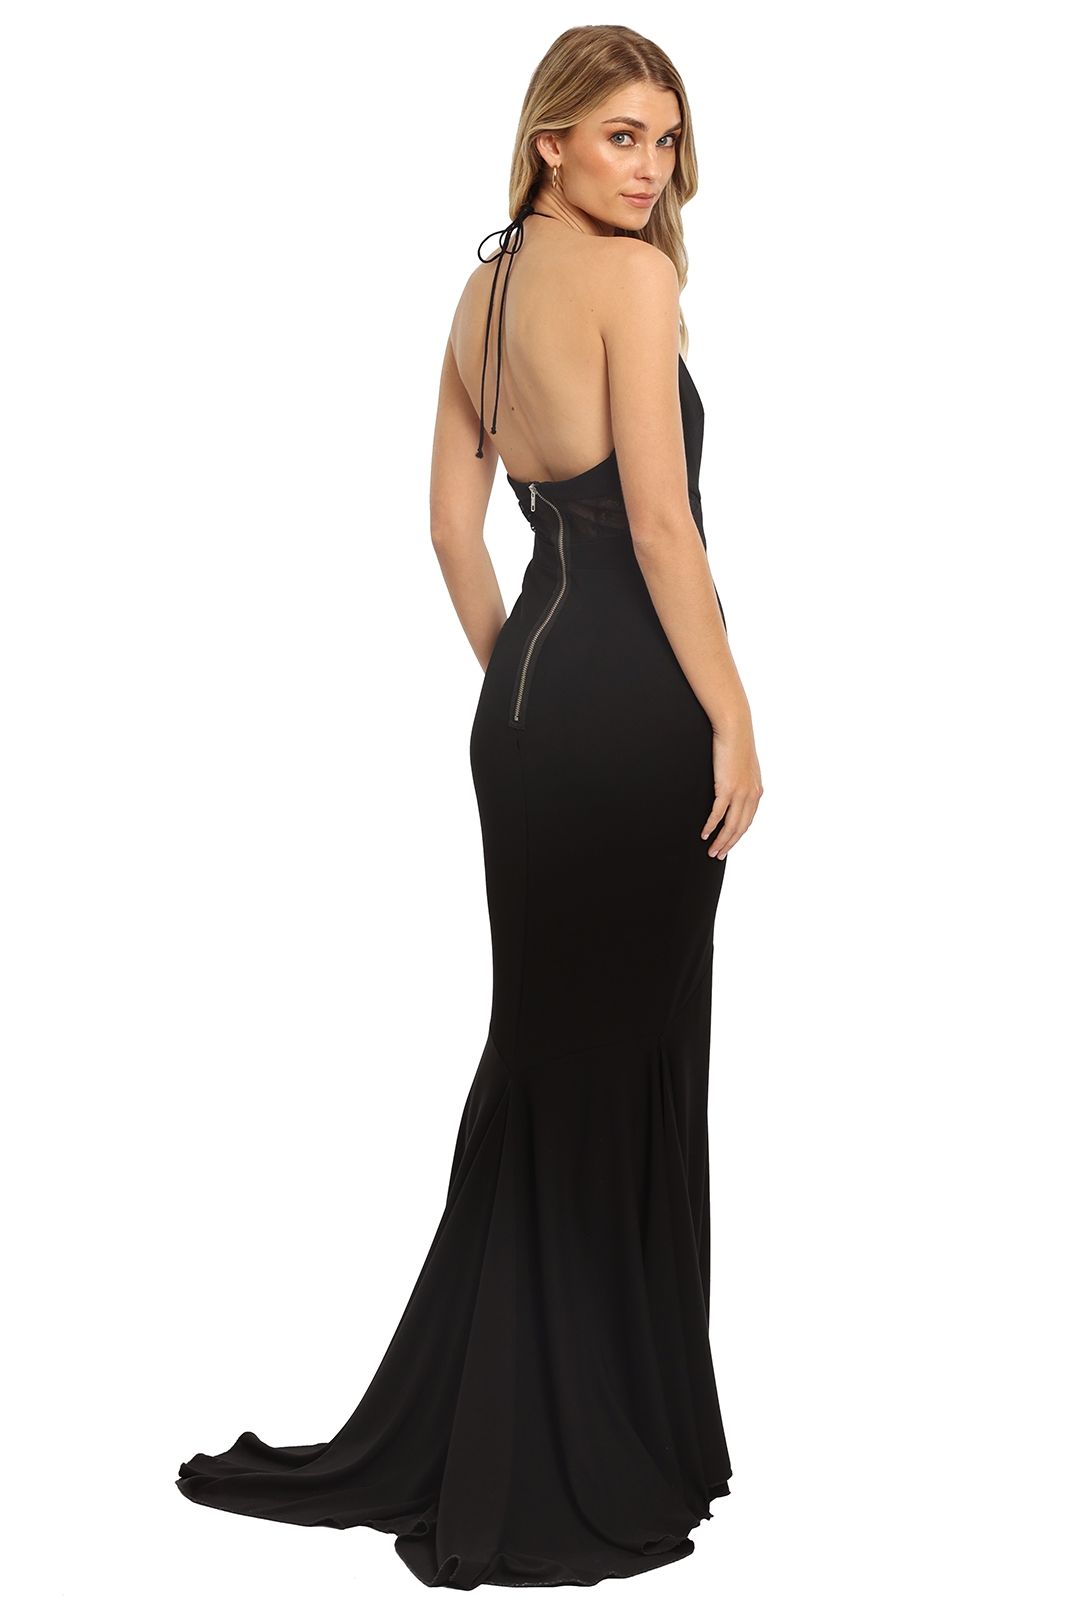 Alex Perry Talise Gown Black halter